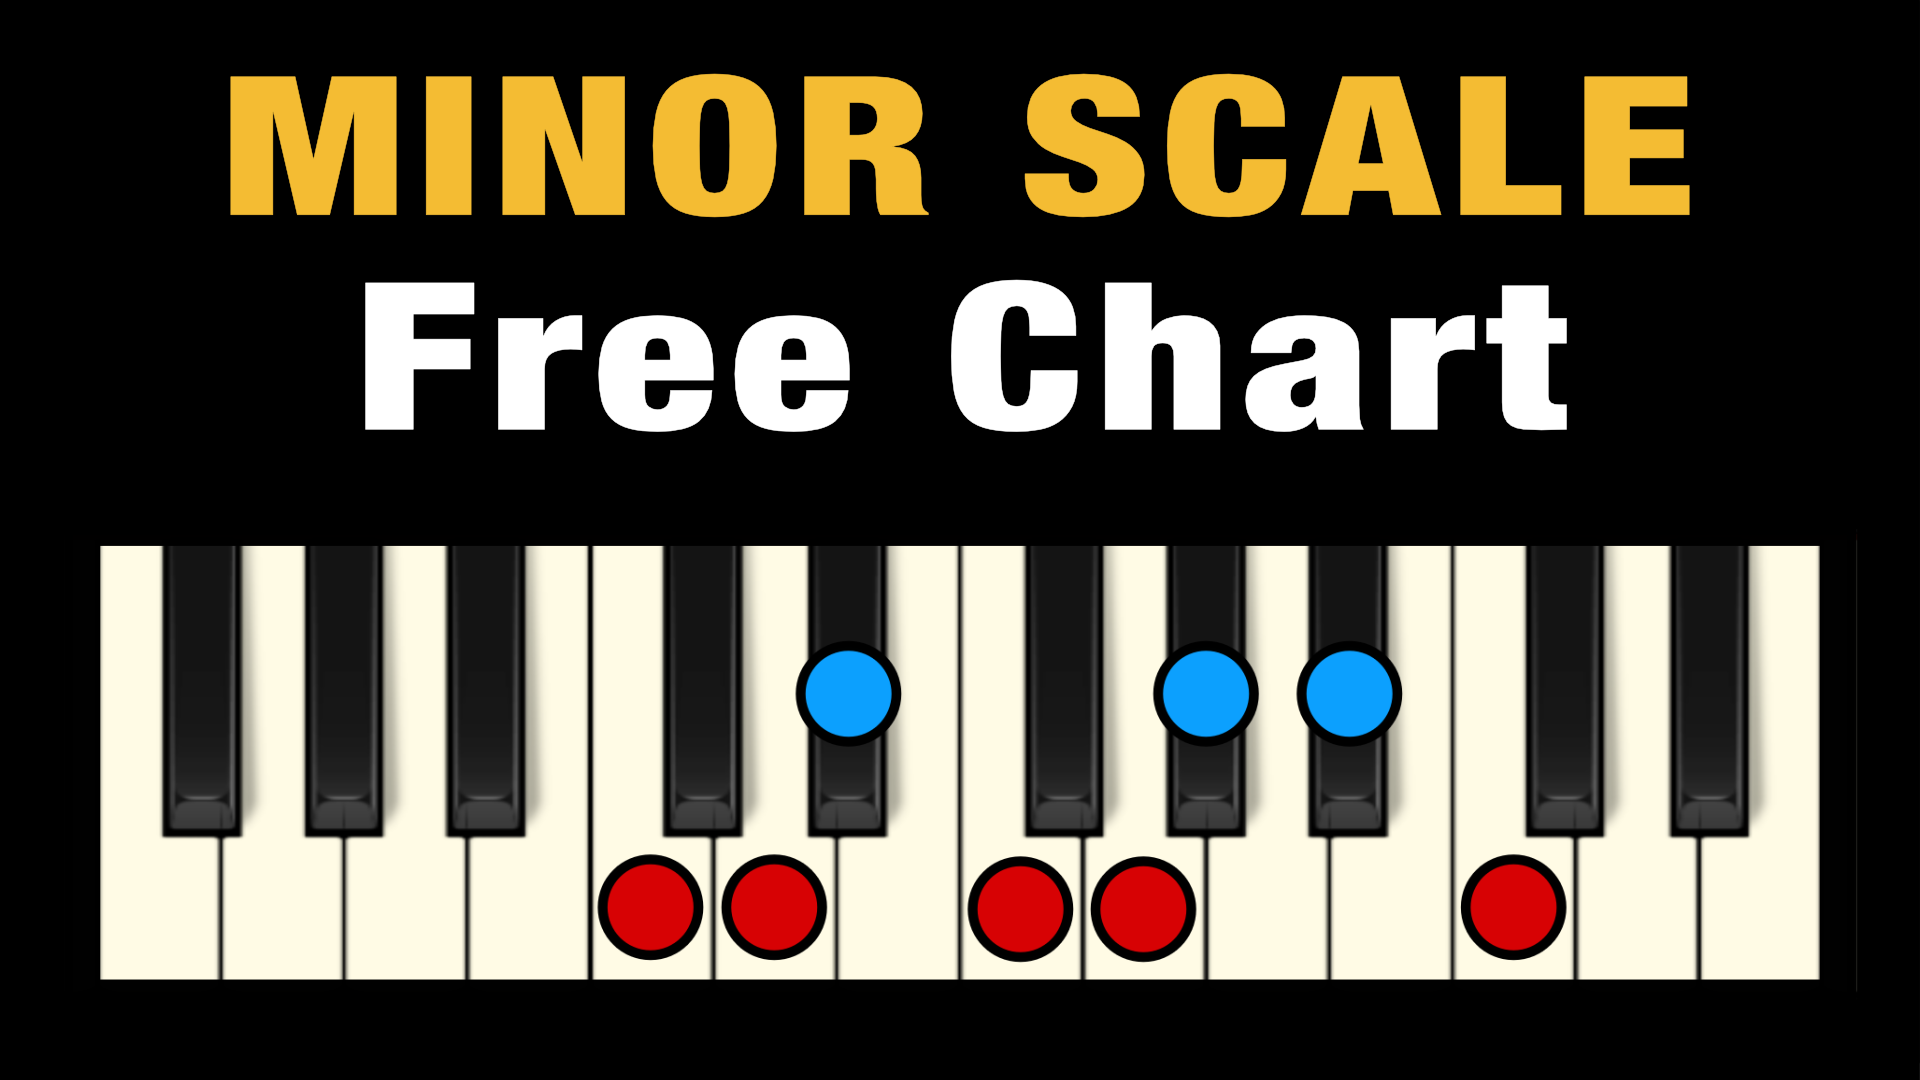 Scale Of A Minor Piano The Minor Scale on Piano (Free Chart + Pictures) – Professional Composers